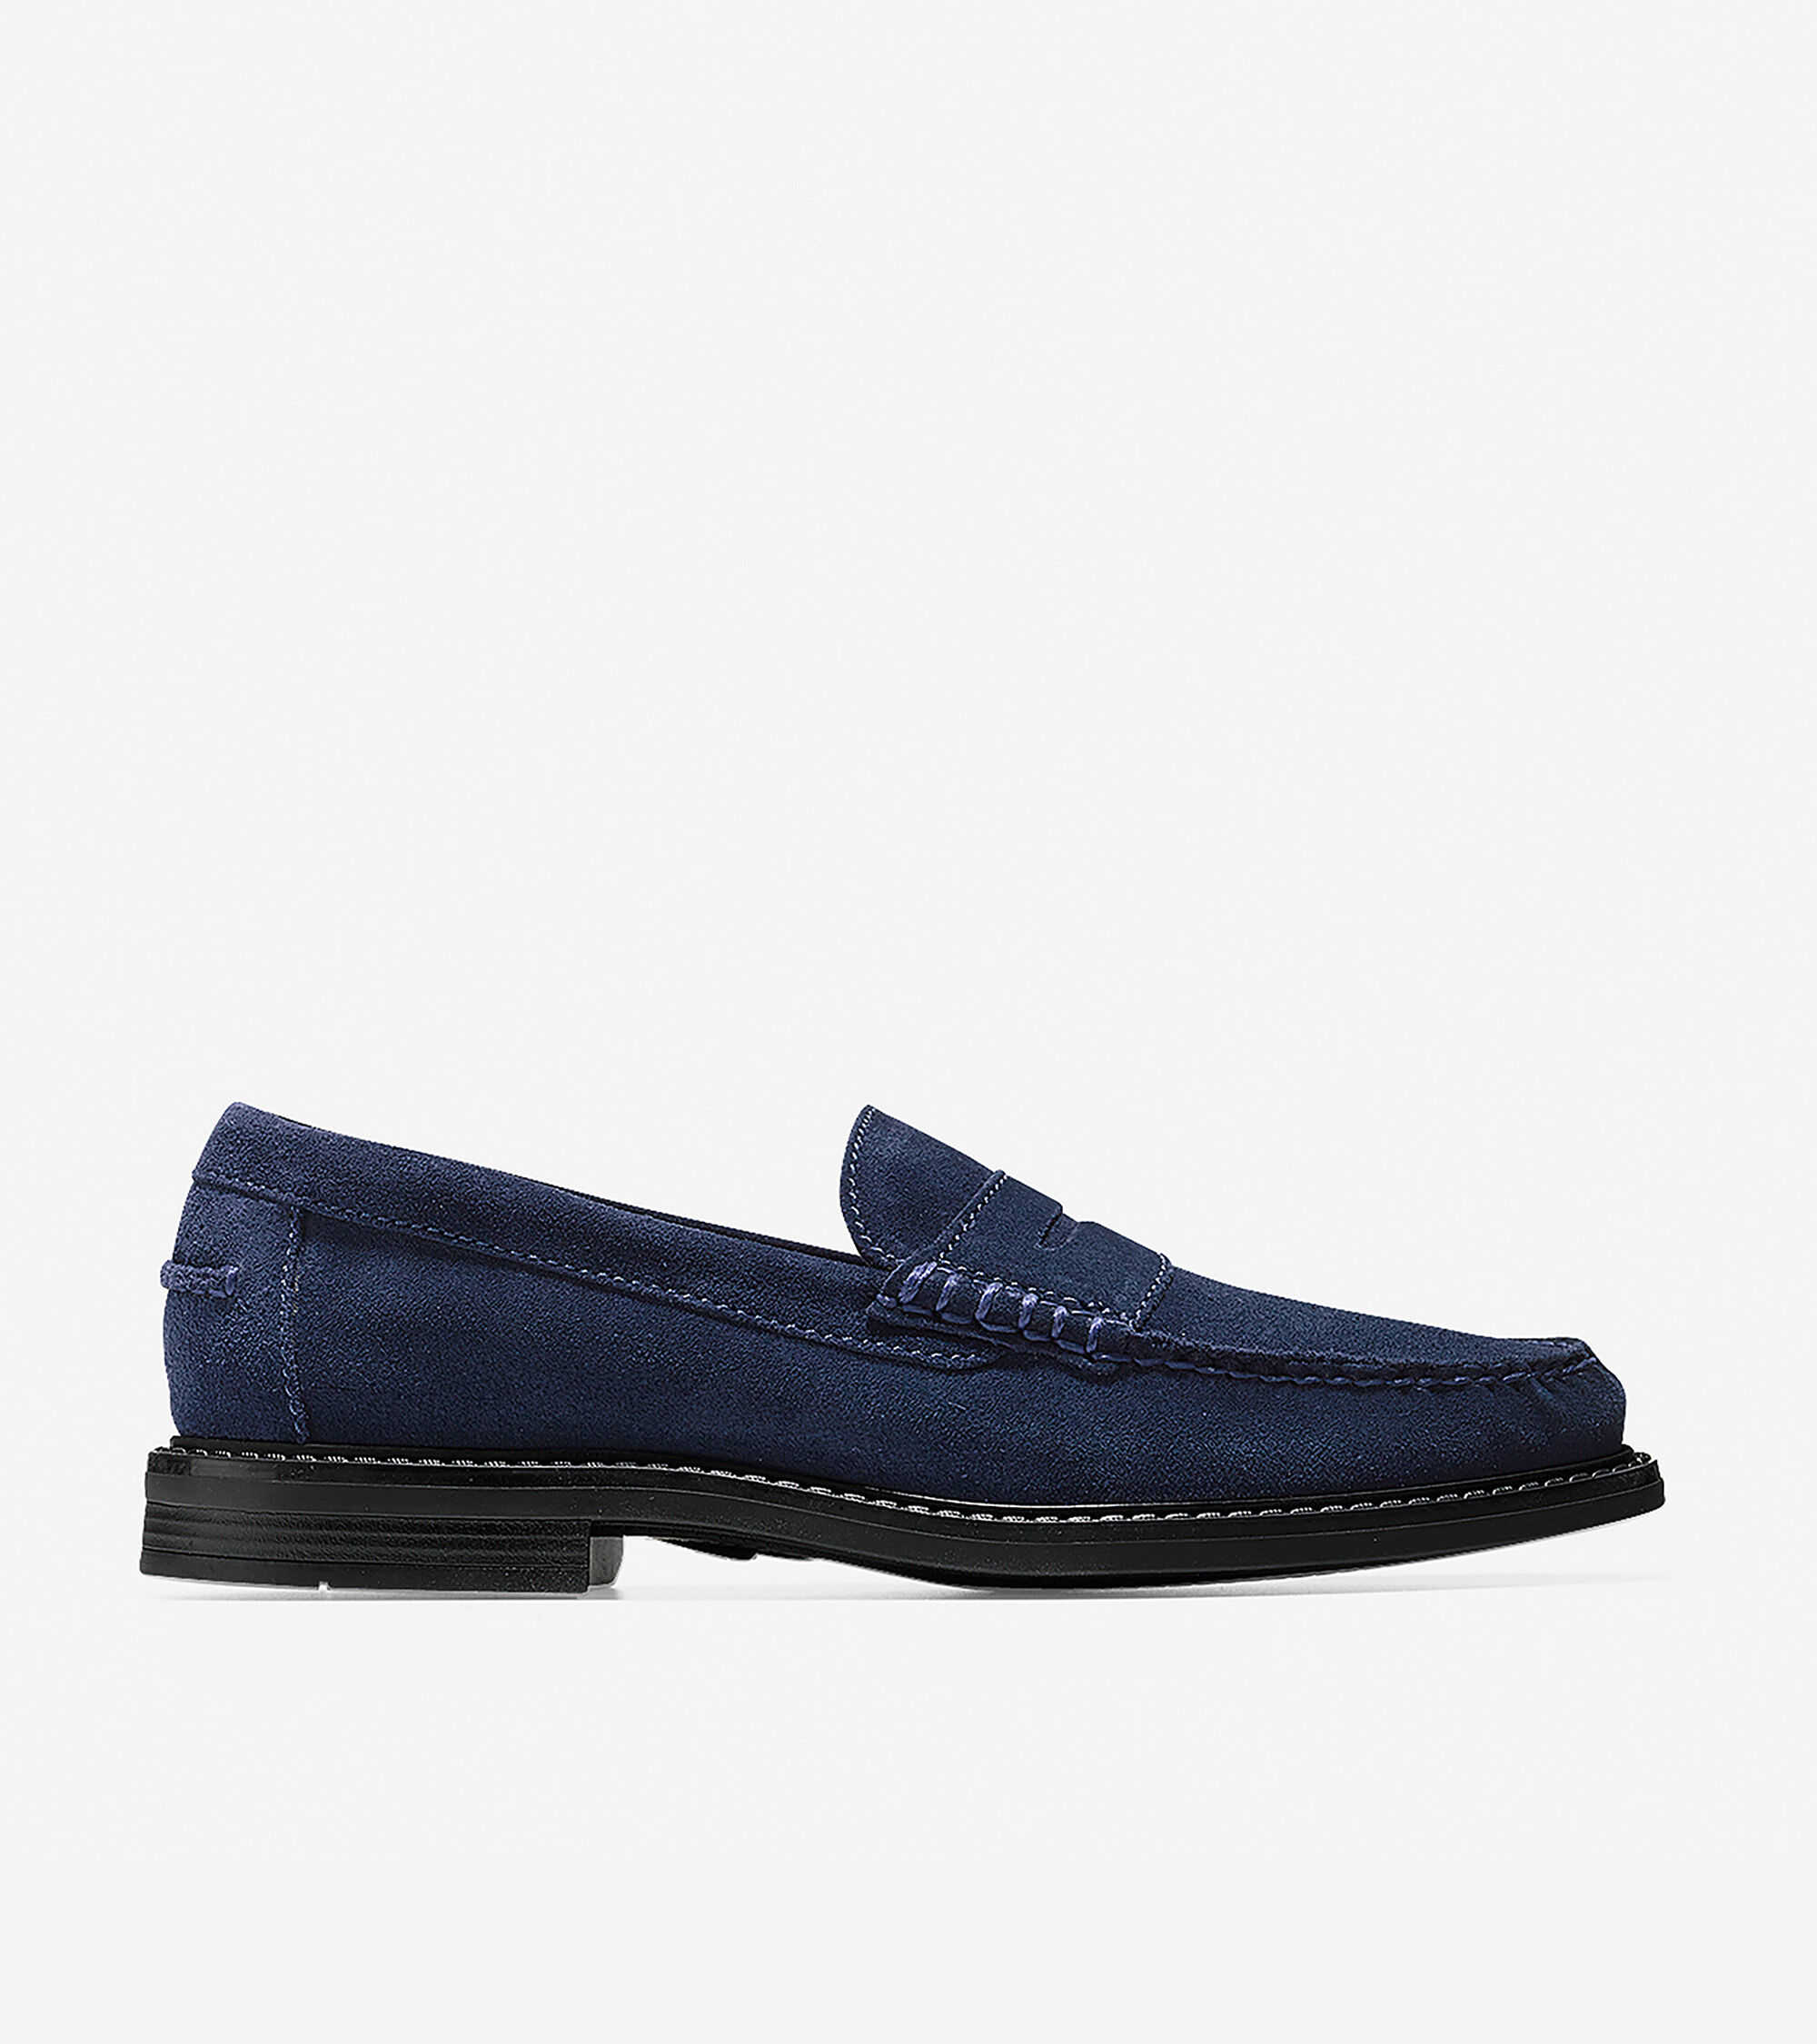 Pinch Campus Penny Loafers in Blazer Blue Suede | Cole Haan